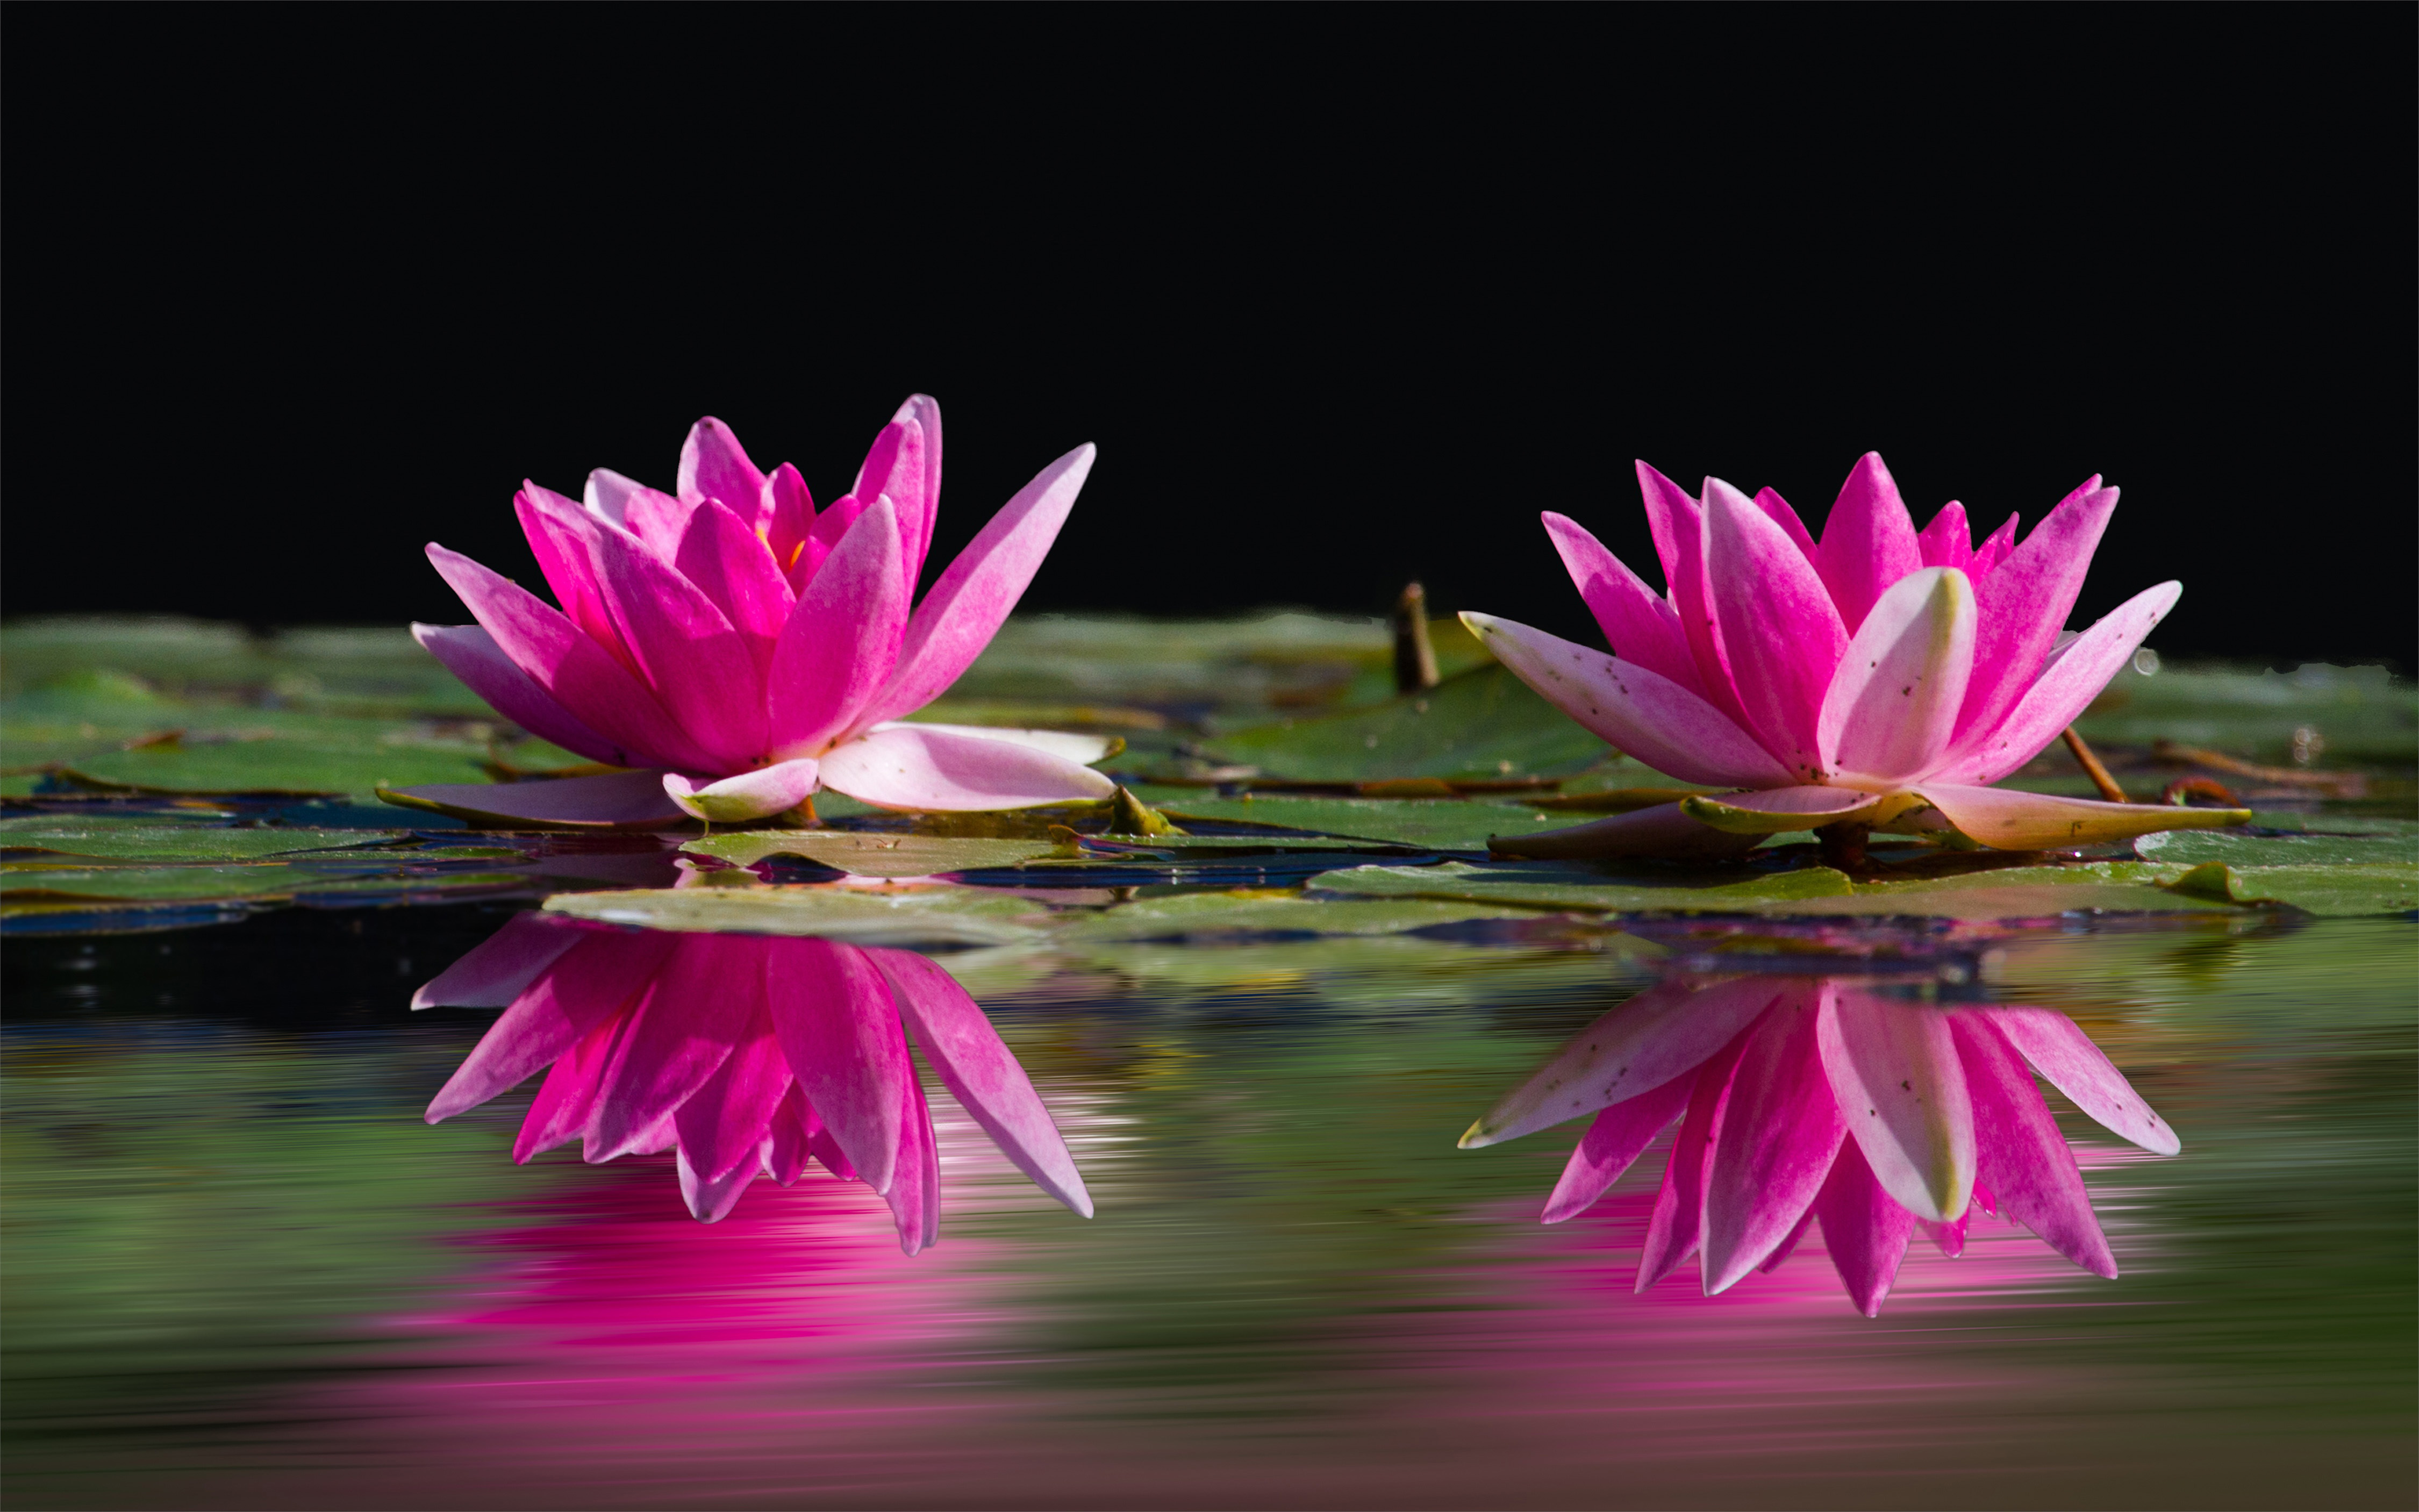 Pink Flowers Water Lilies Reflection In Water Nature Wallpaper Flower Full Hd For Desktop 4500x2813 Wallpapers13 Com